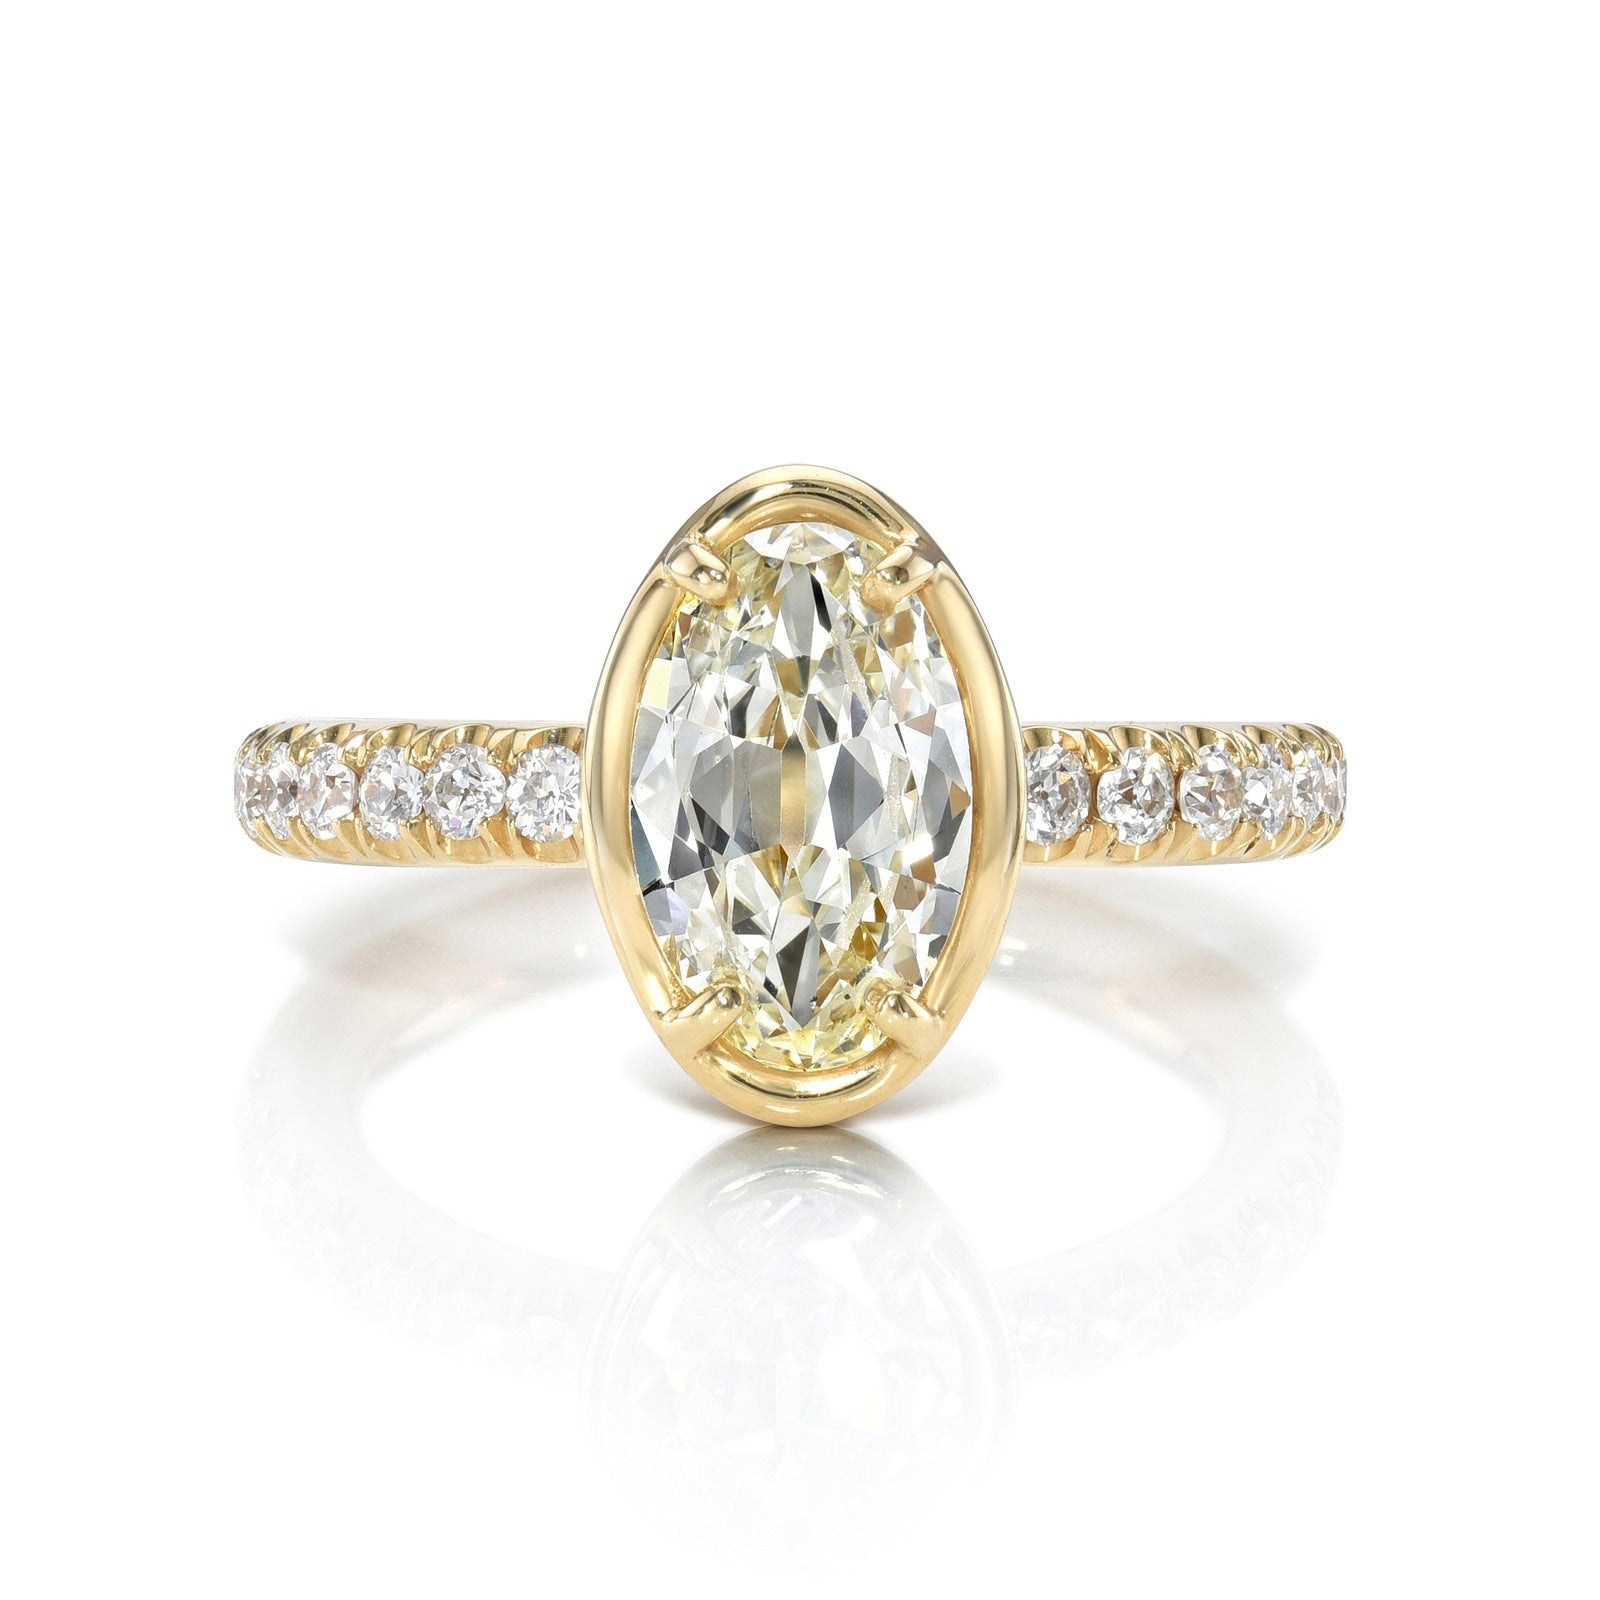 SINGLE STONE ELLA RING featuring 1.39ct L/VS2 GIA certified moval cut diamond with 0.35ctw old European cut accent diamonds prong set in a handcrafted 18K yellow gold mounting.